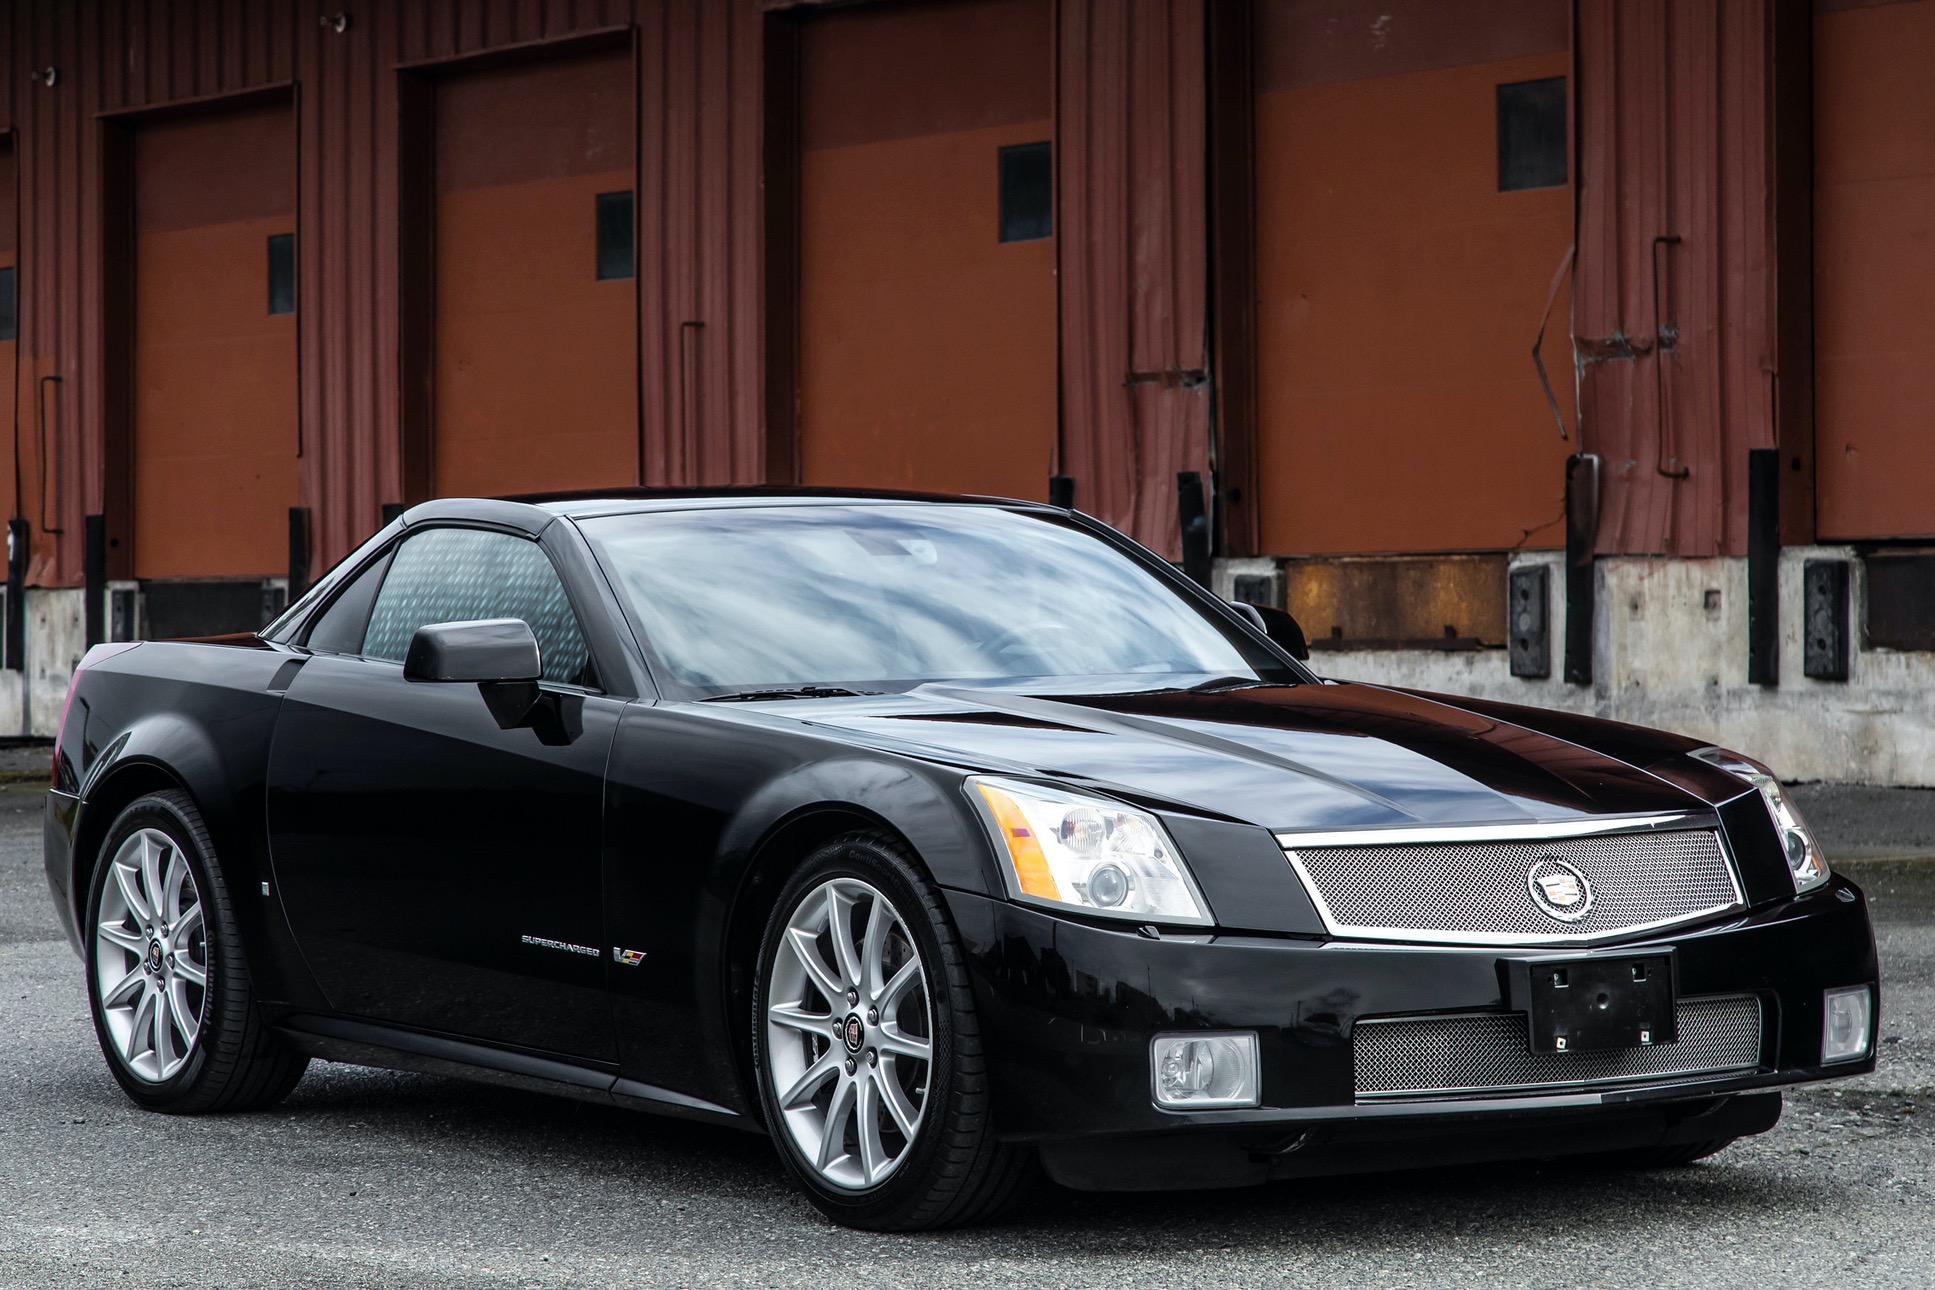 2006 Cadillac XLR-V Supercharged - The official convertible of...? :  r/regularcarreviews